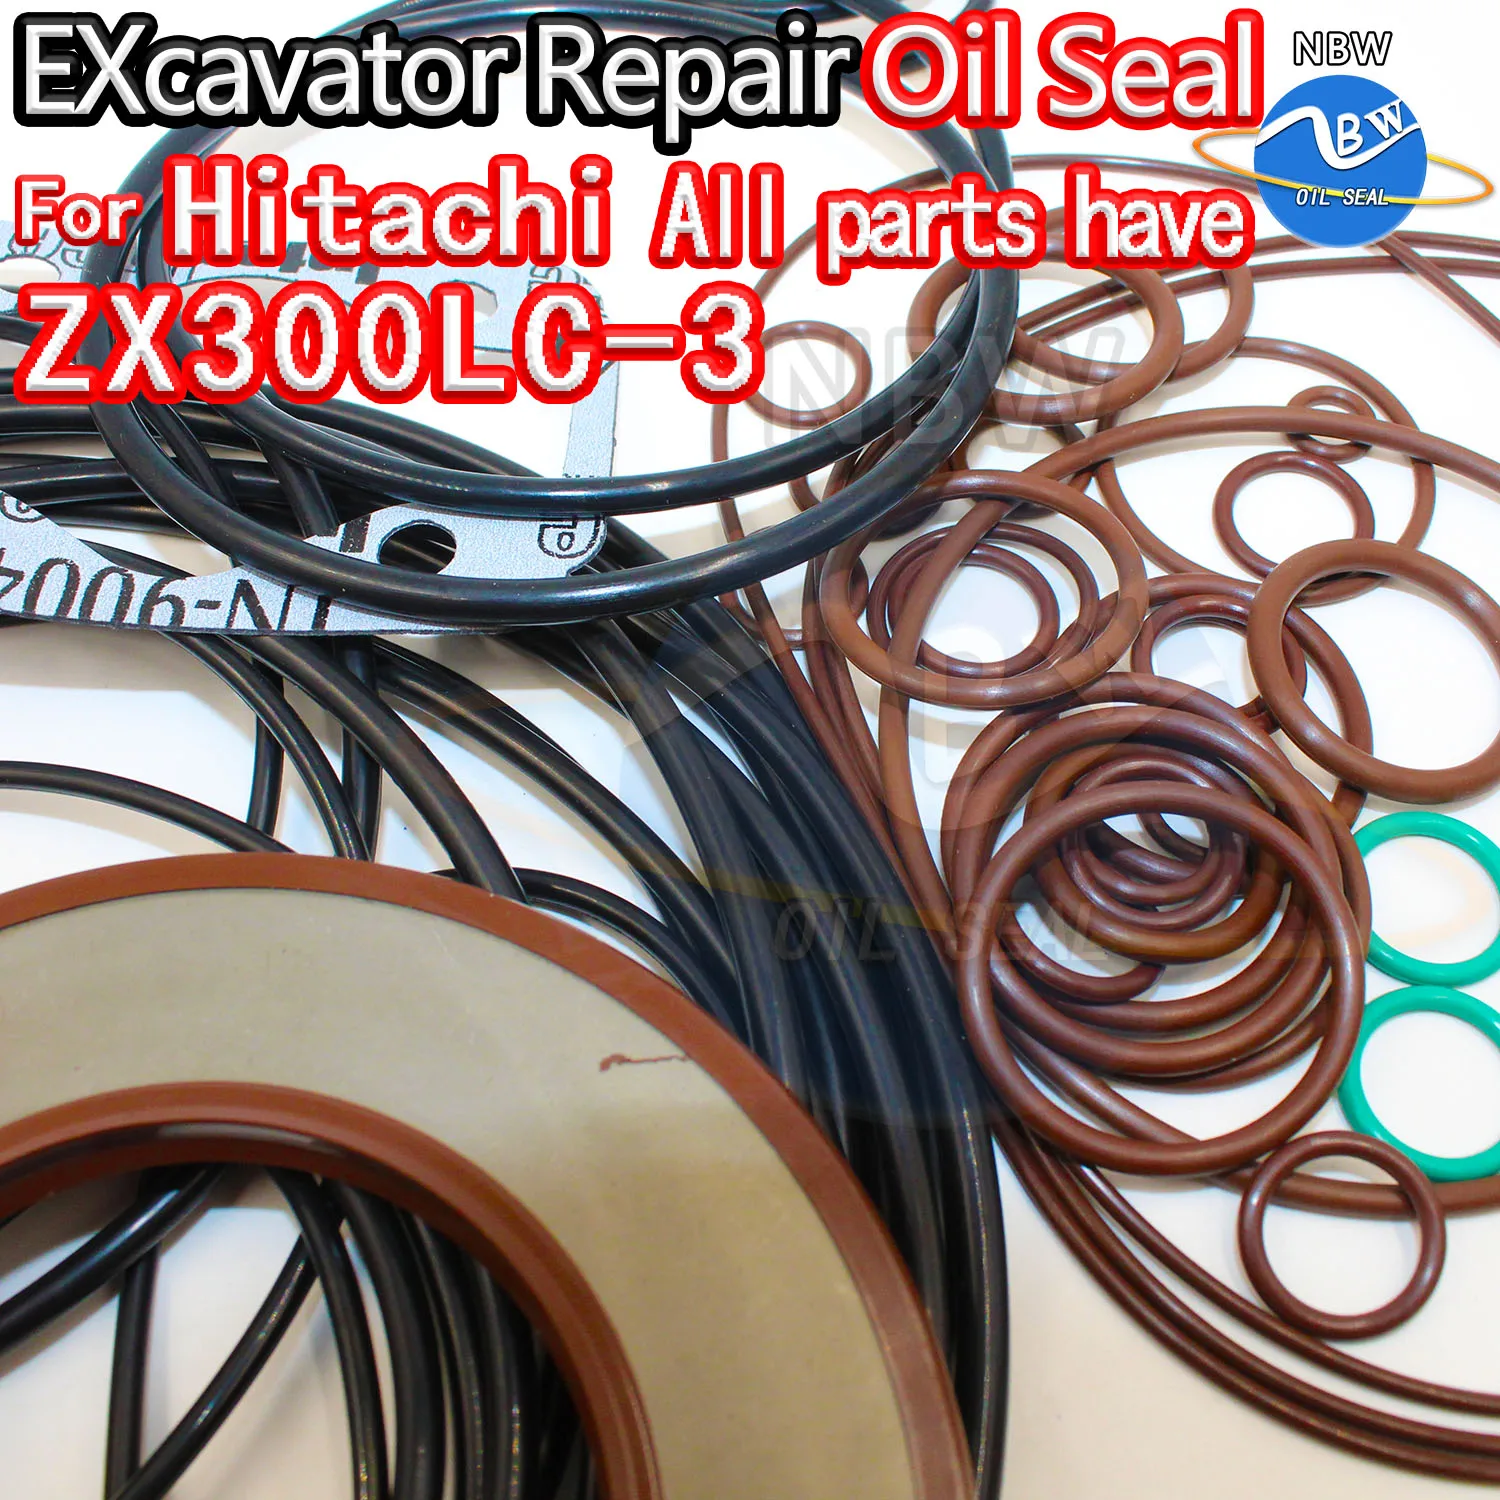 

For HITACHI ZX300LC-3 Excavator Oil Seal Kit High Quality Repair ZX300LC 3 Gear Center Joint Gasket Nitrile NBR Nok Washer Skf